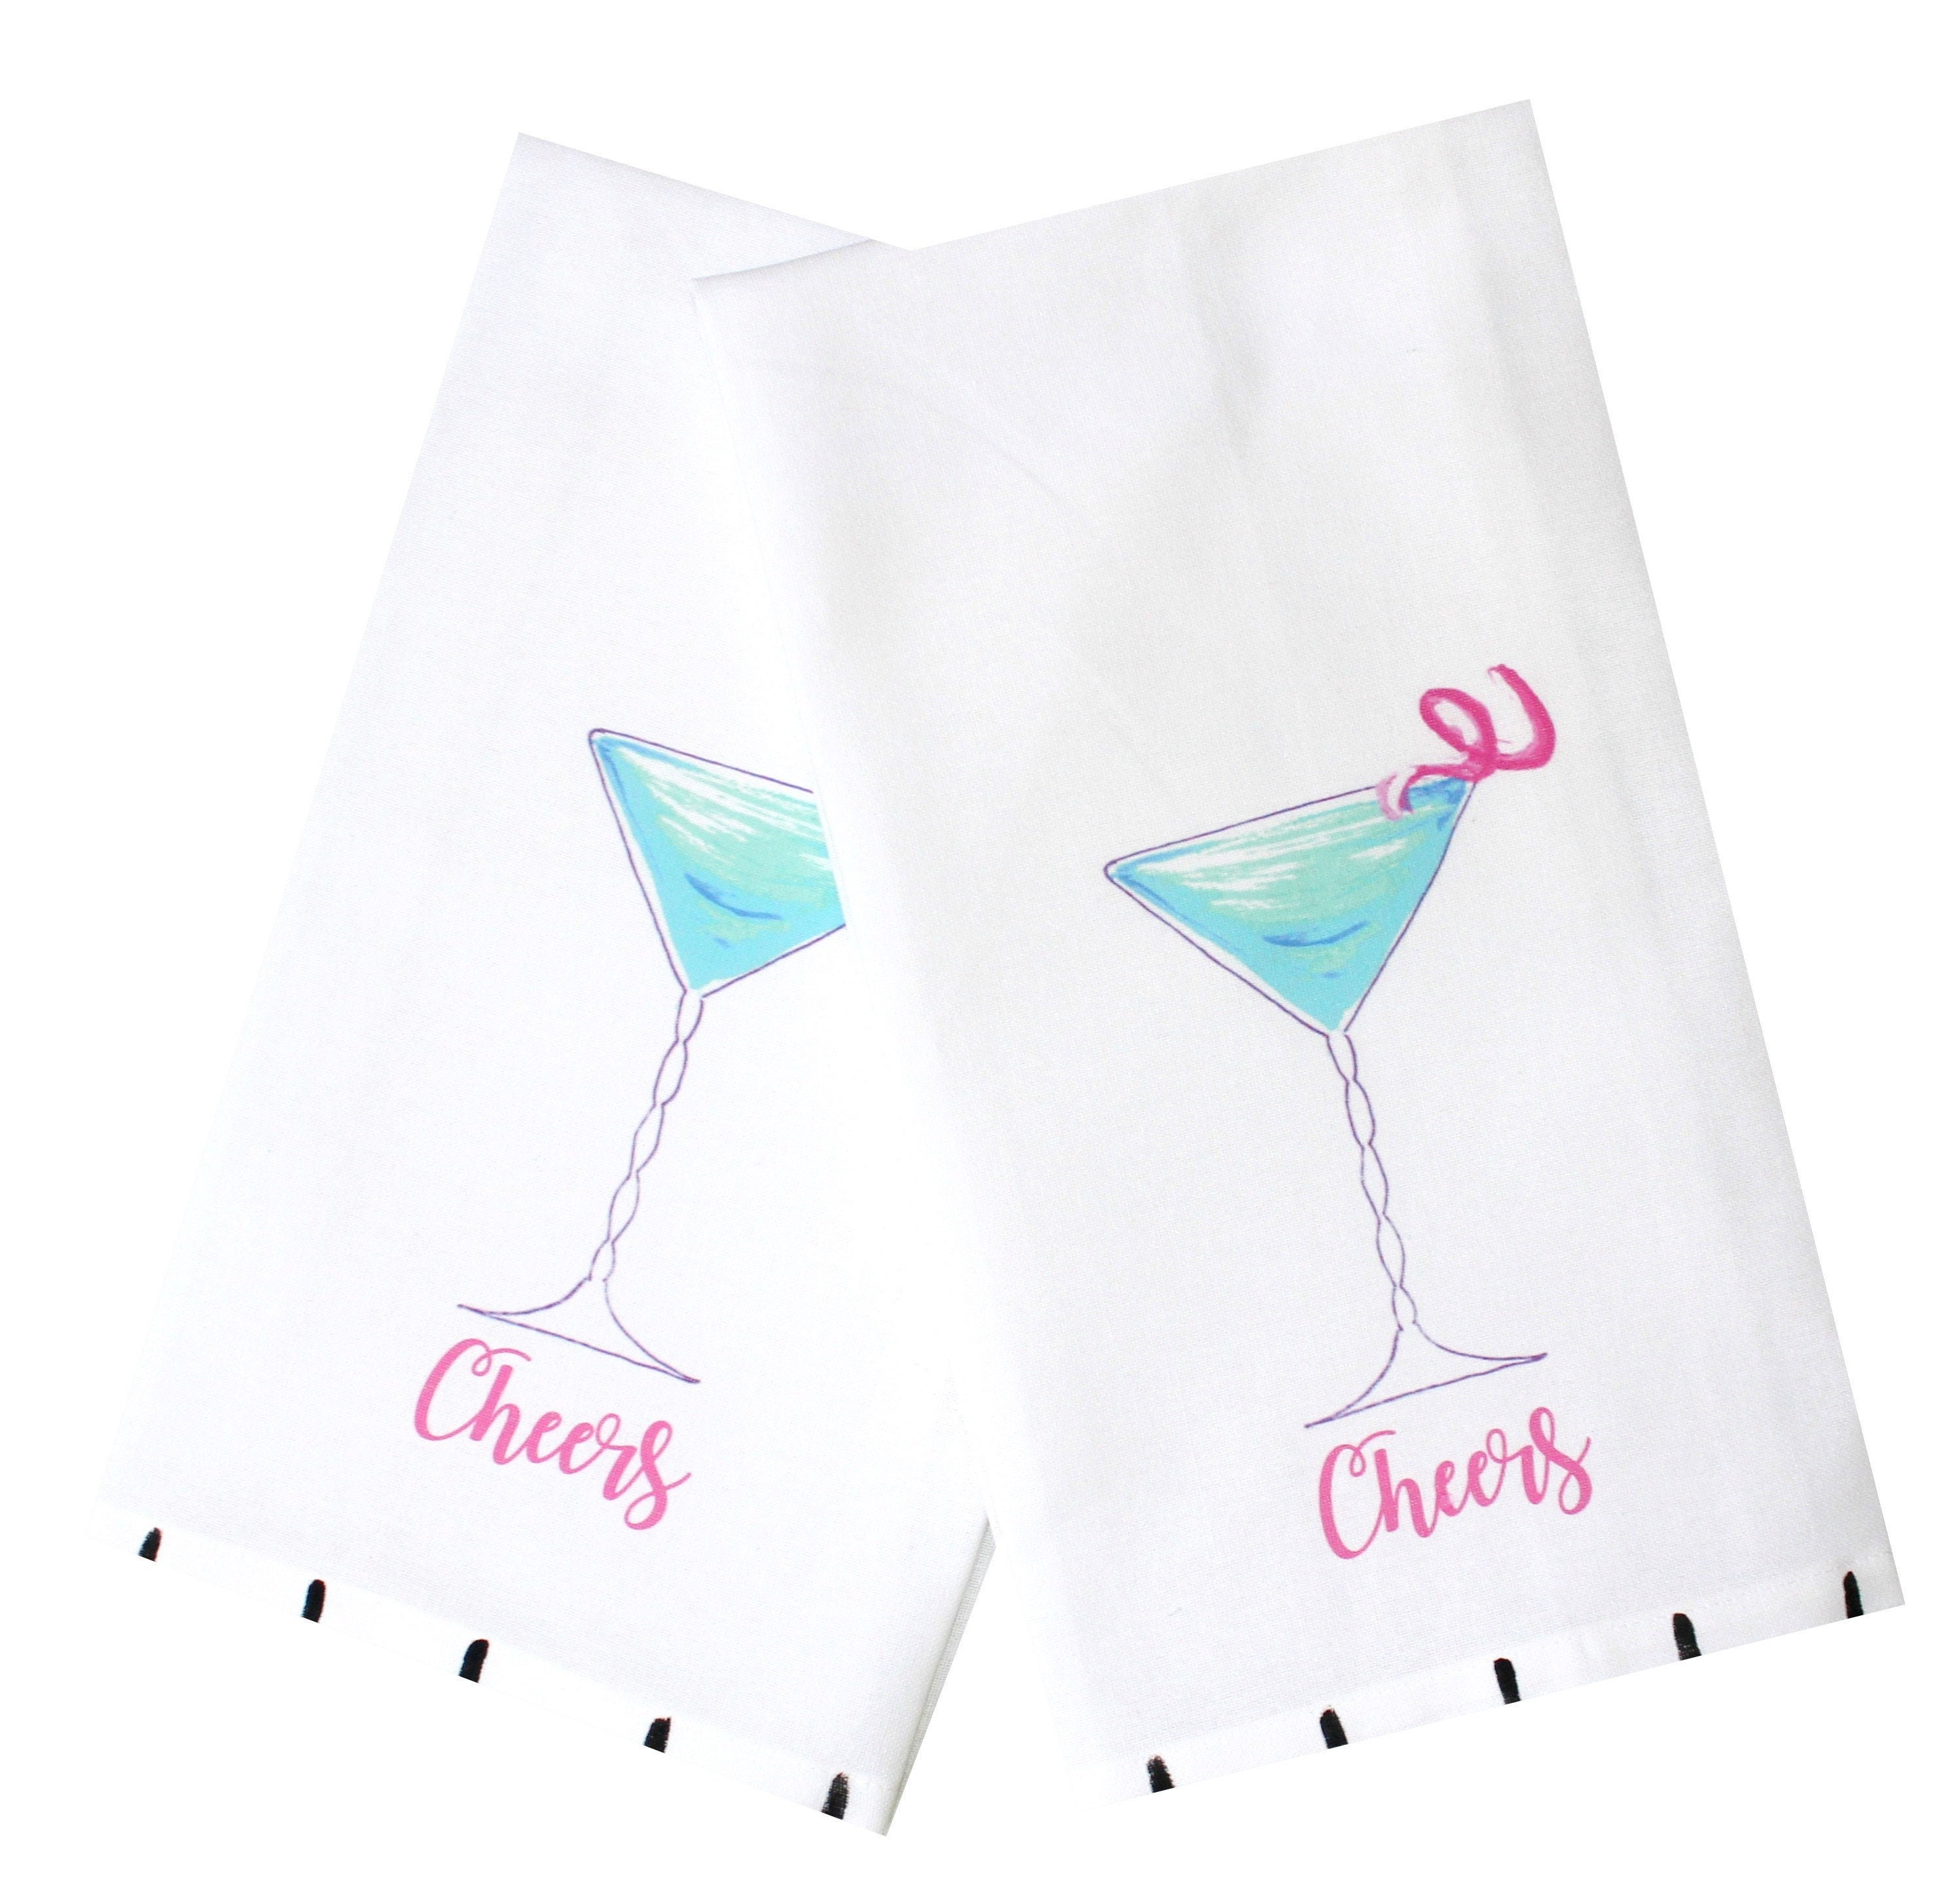 Cocktail Martini Towels, Drink Themed Kitchen Towels, Bar Towels 